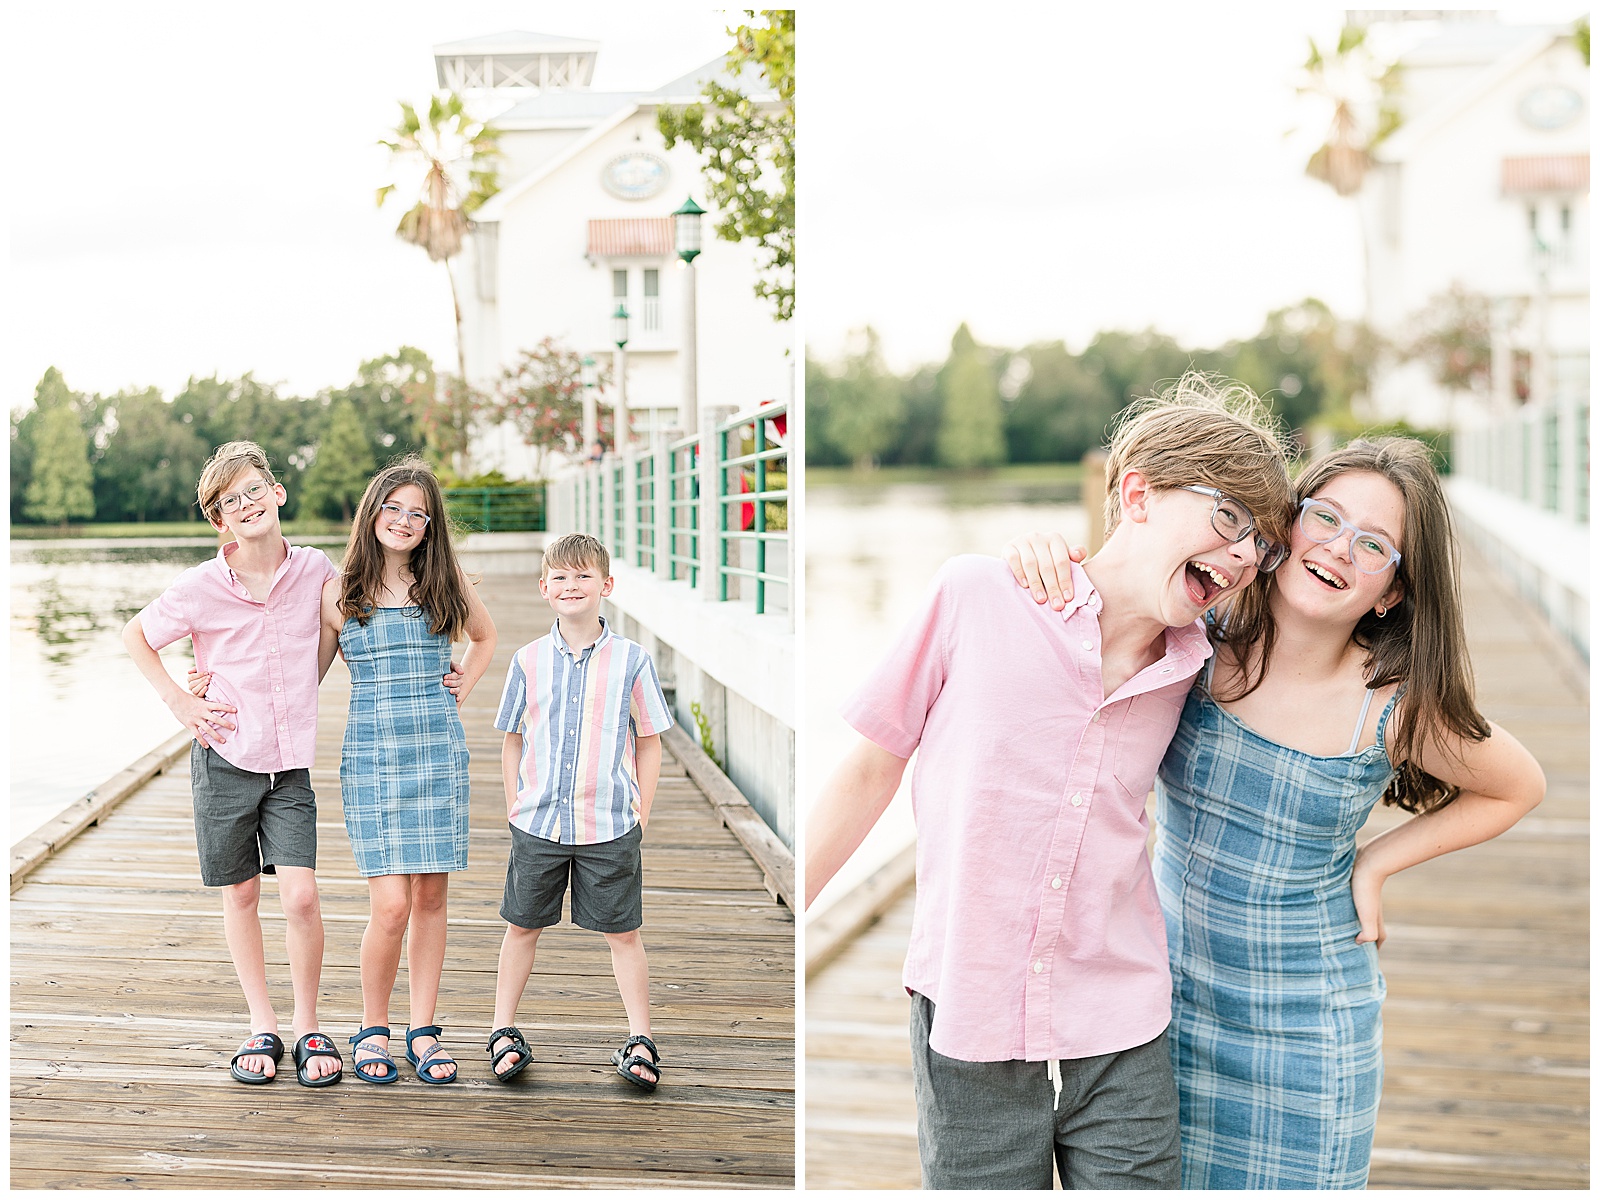 Sibling photos during family photo session in Celebration, FL